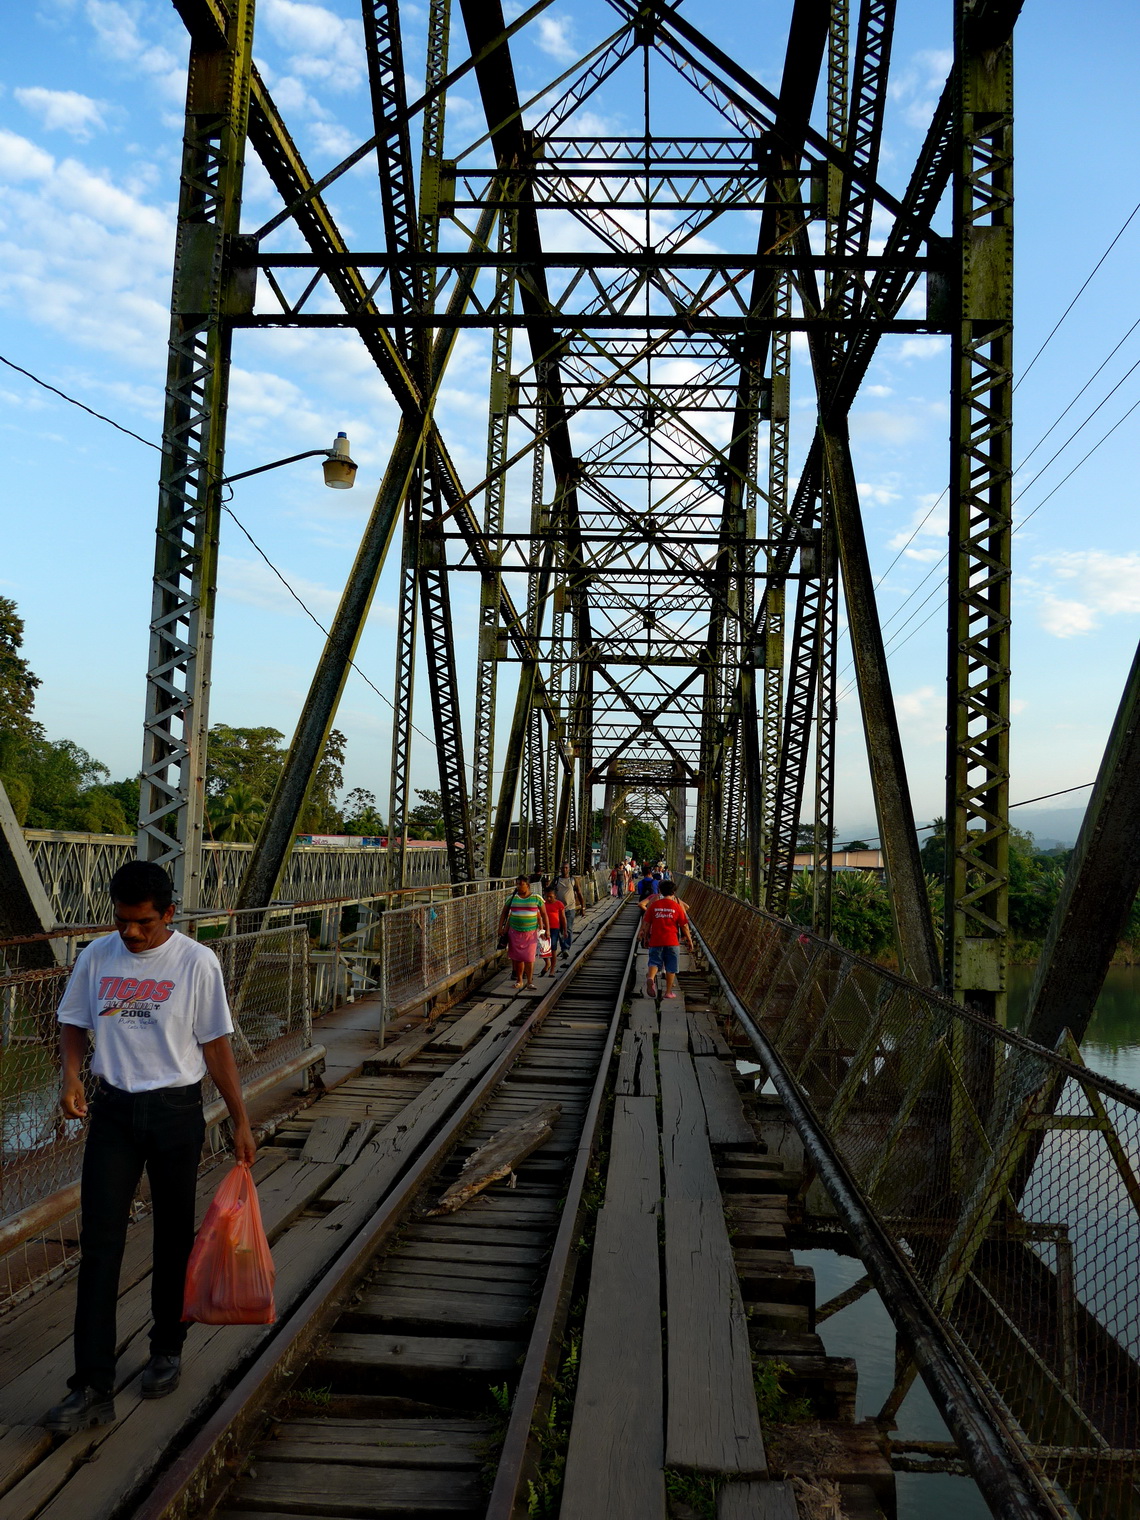 The old railway bridge on the border between Costa Rica and Panama which is now used by pedestrians - Look at the nice wholes